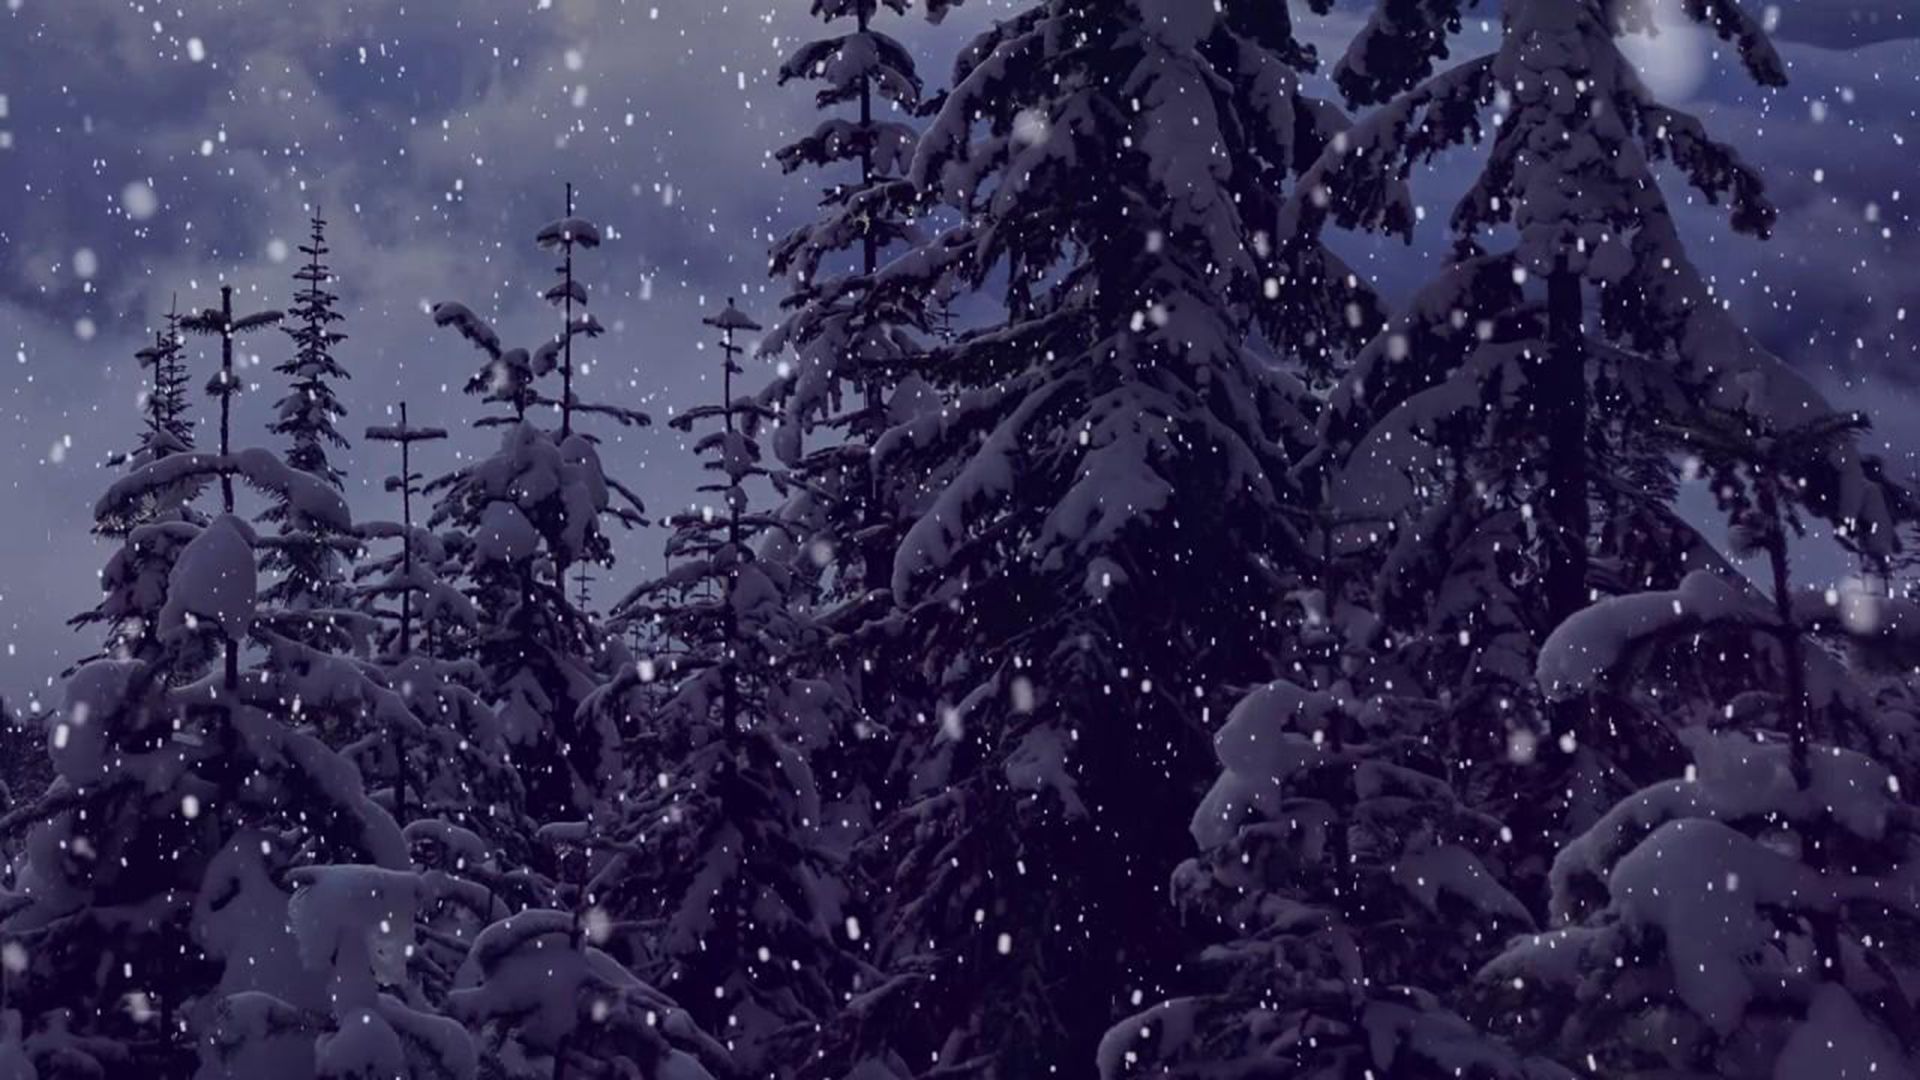 A snowfall in the forest - 1920x1080